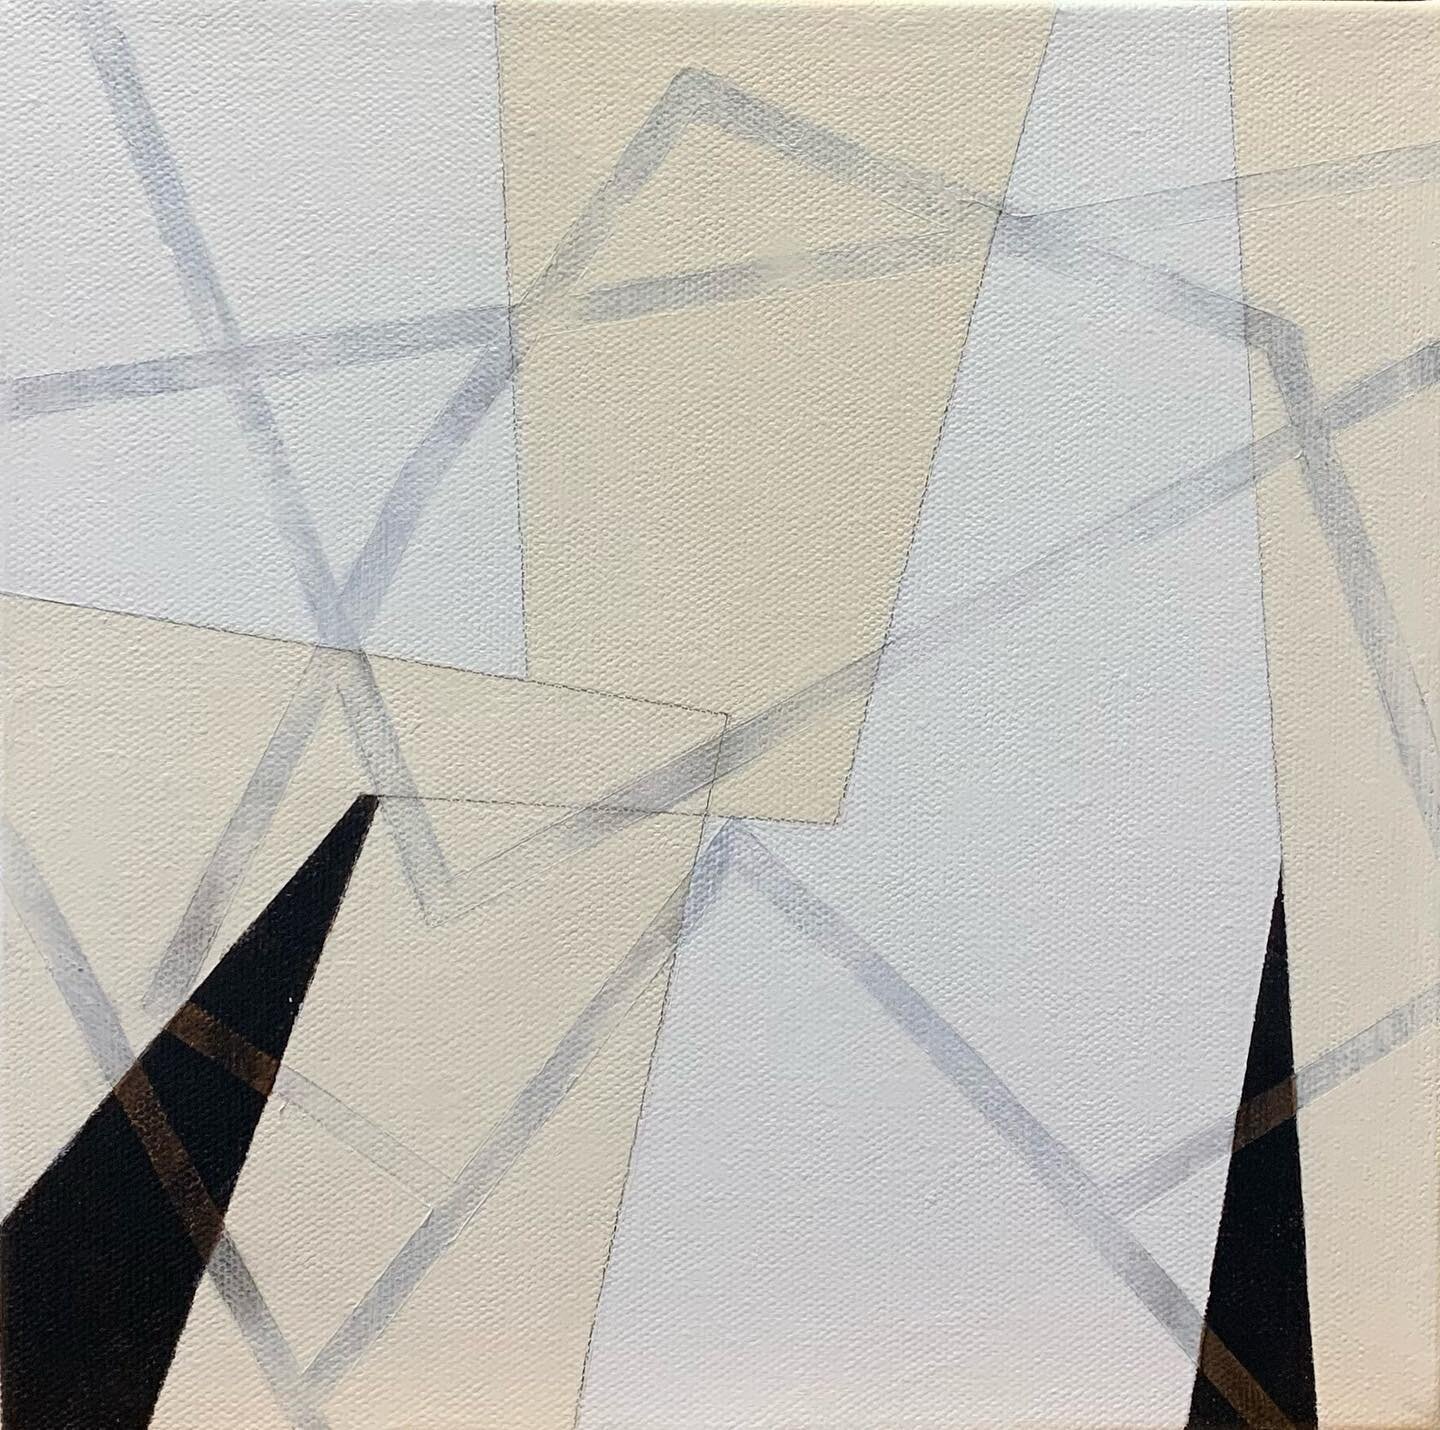 An experiment in lost n found. 
#lines #angles #smallformat #acrylic #graphite
.
November 2022
.
#painting #contemporaryart #art #artist #minimalism #abstractpainting #geometric #geometricabstraction #architectural #interior #artcollector #artseries 